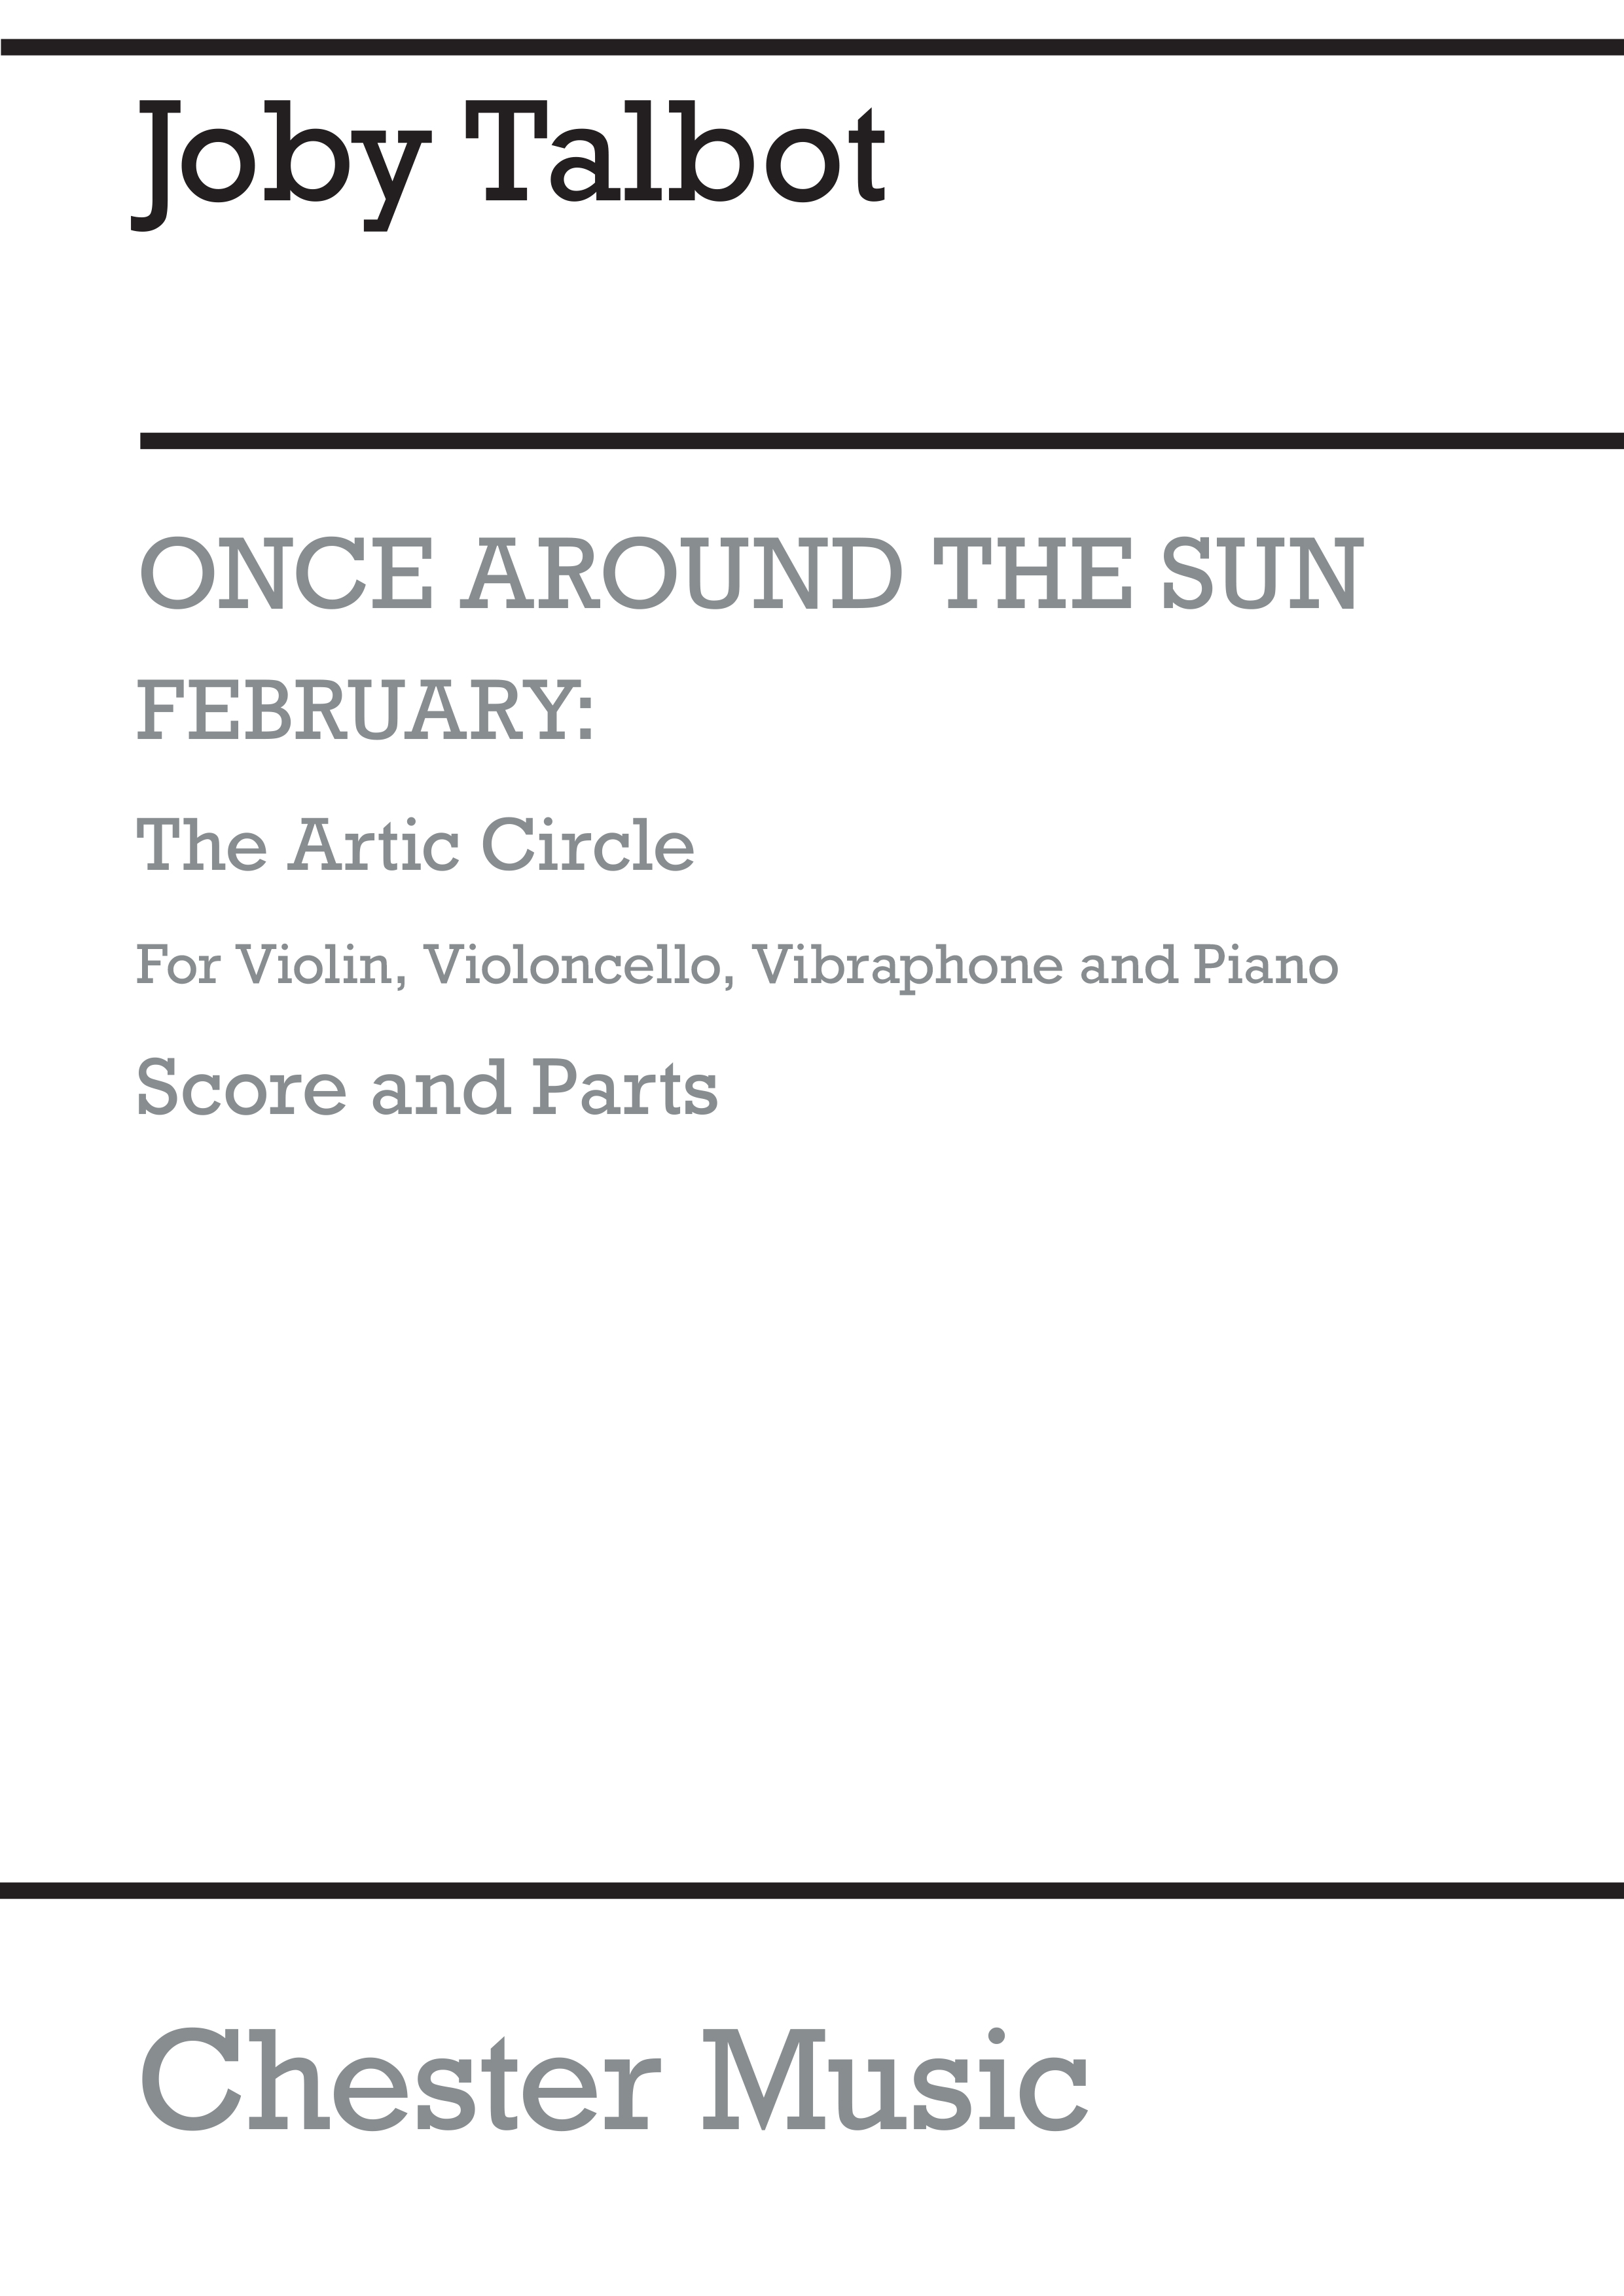 Joby Talbot: February - The Arctic Circle: Chamber Ensemble: Score and Parts